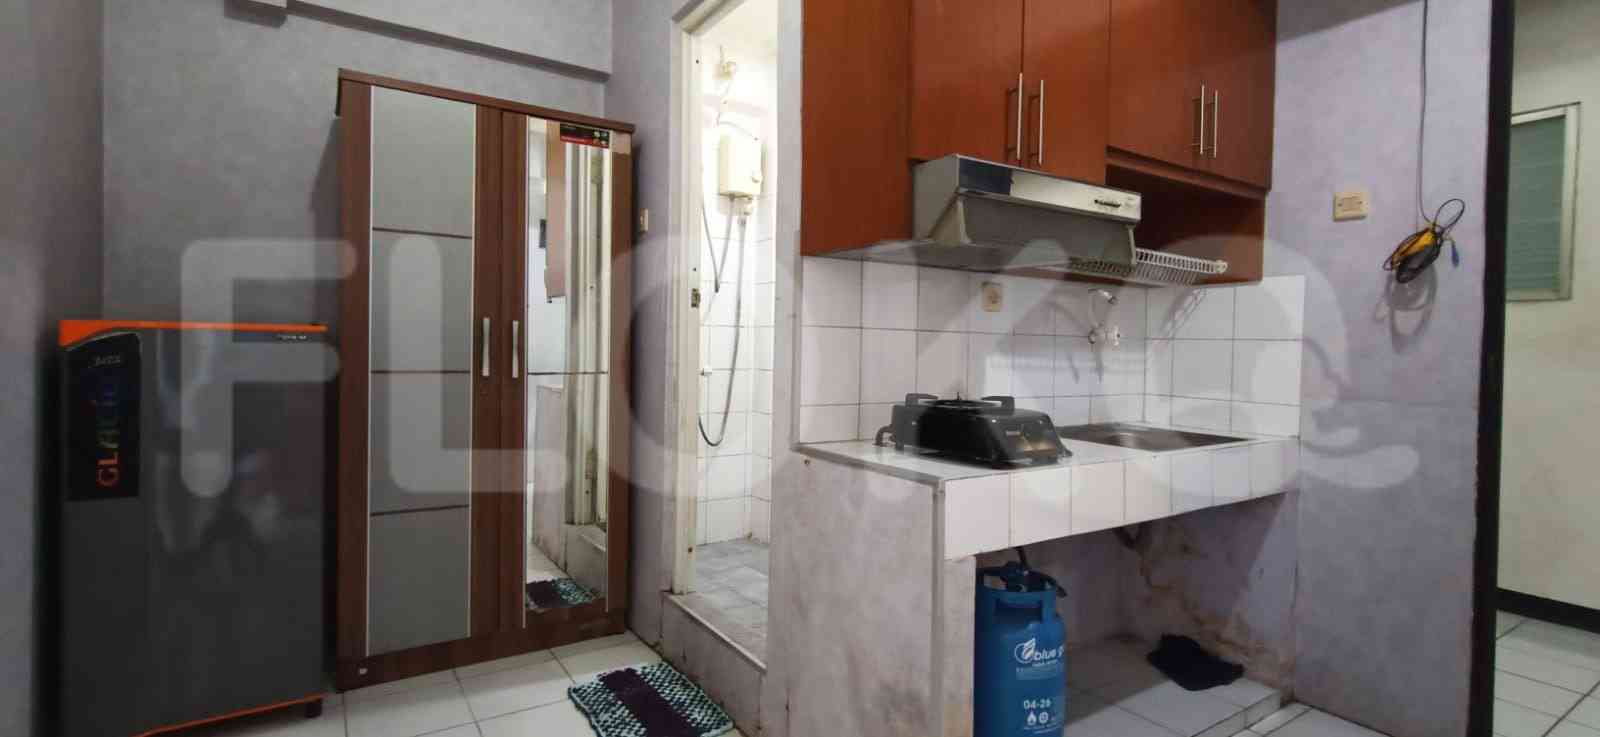 1 Bedroom on 7th Floor for Rent in Sentra Timur Residence - fca1ac 7